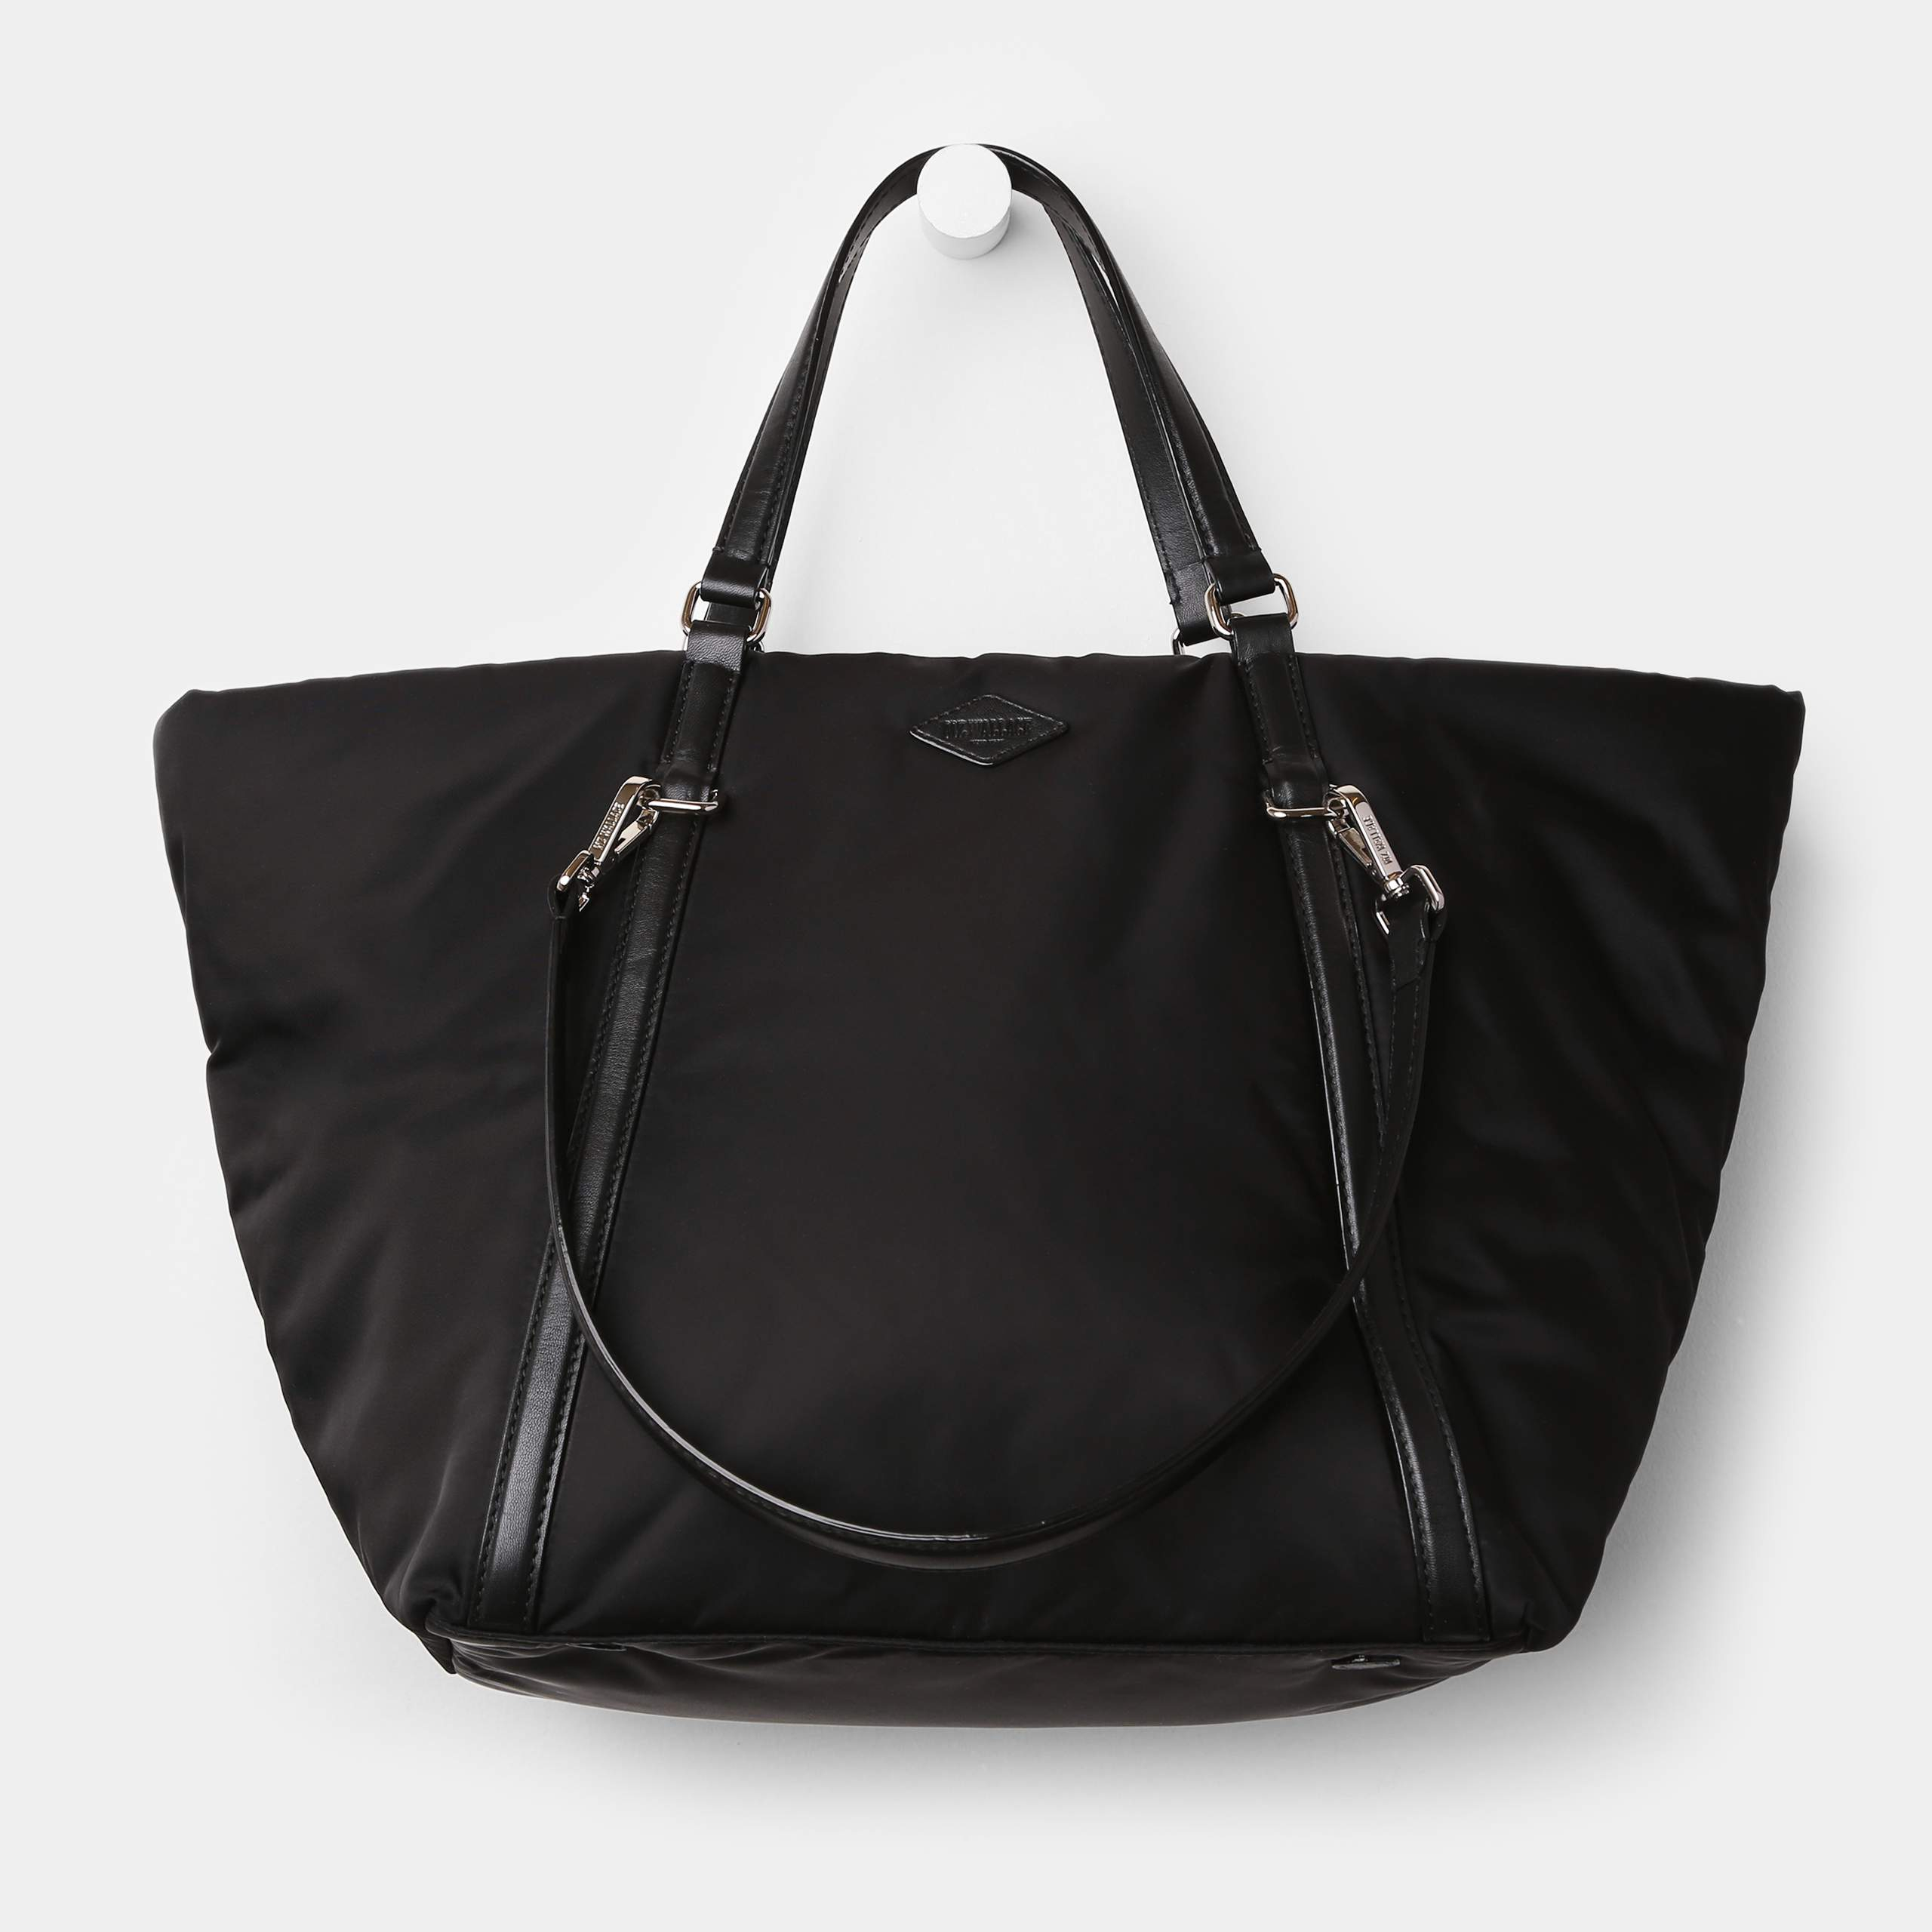 Image result for mz wallace black astor tote